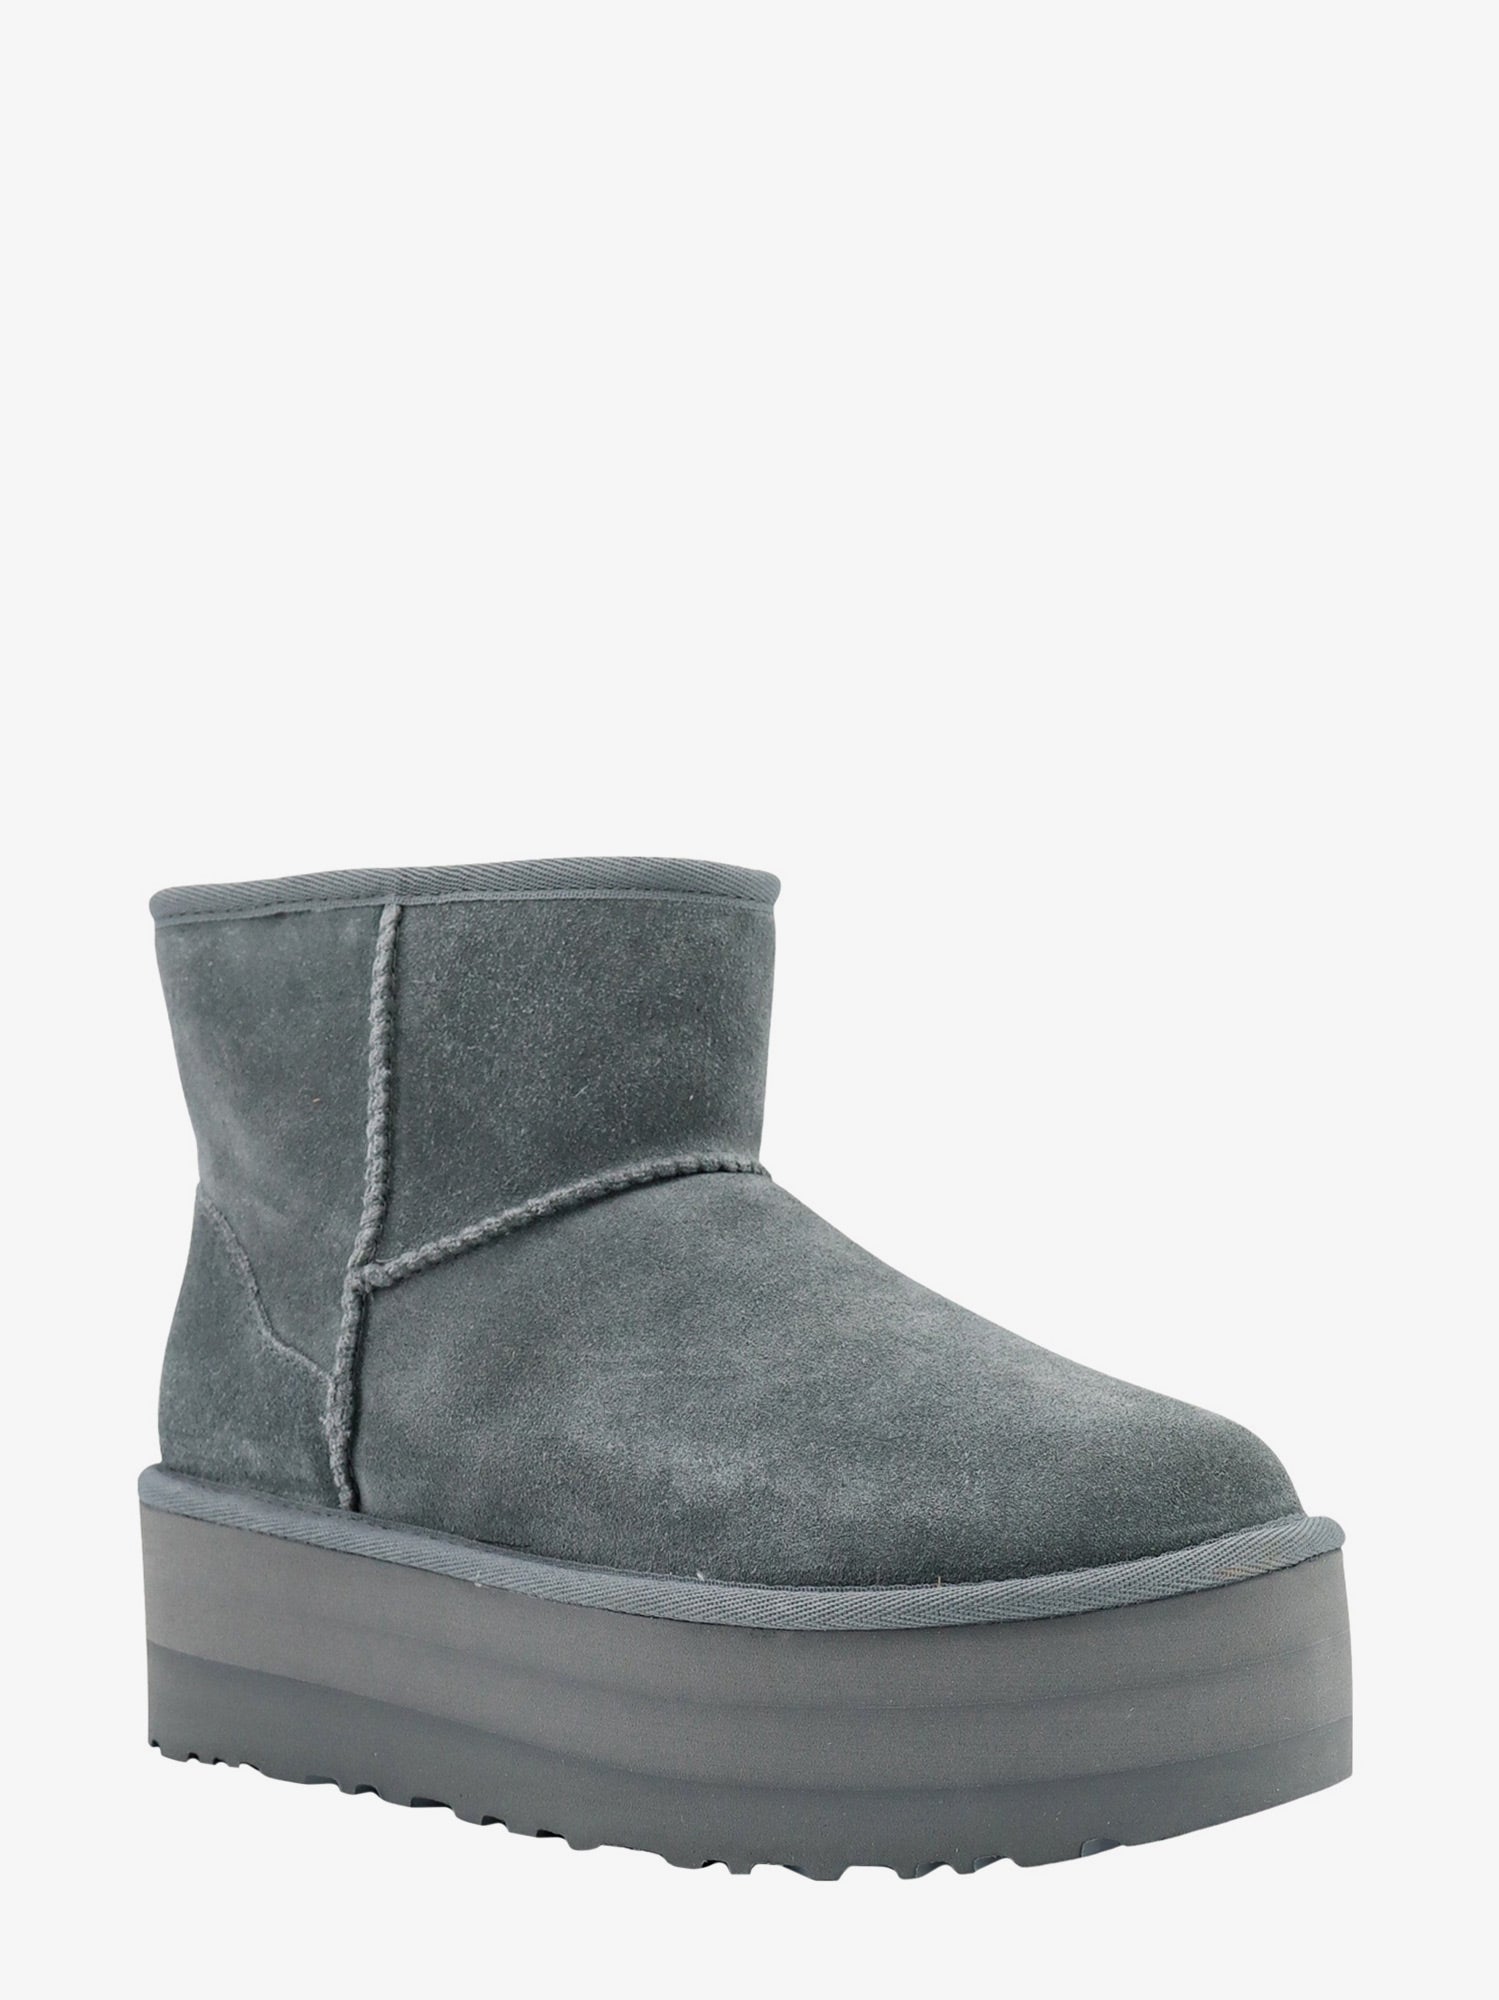 Ugg Woman Ankle Boots Woman Grey Boots - Walmart.com